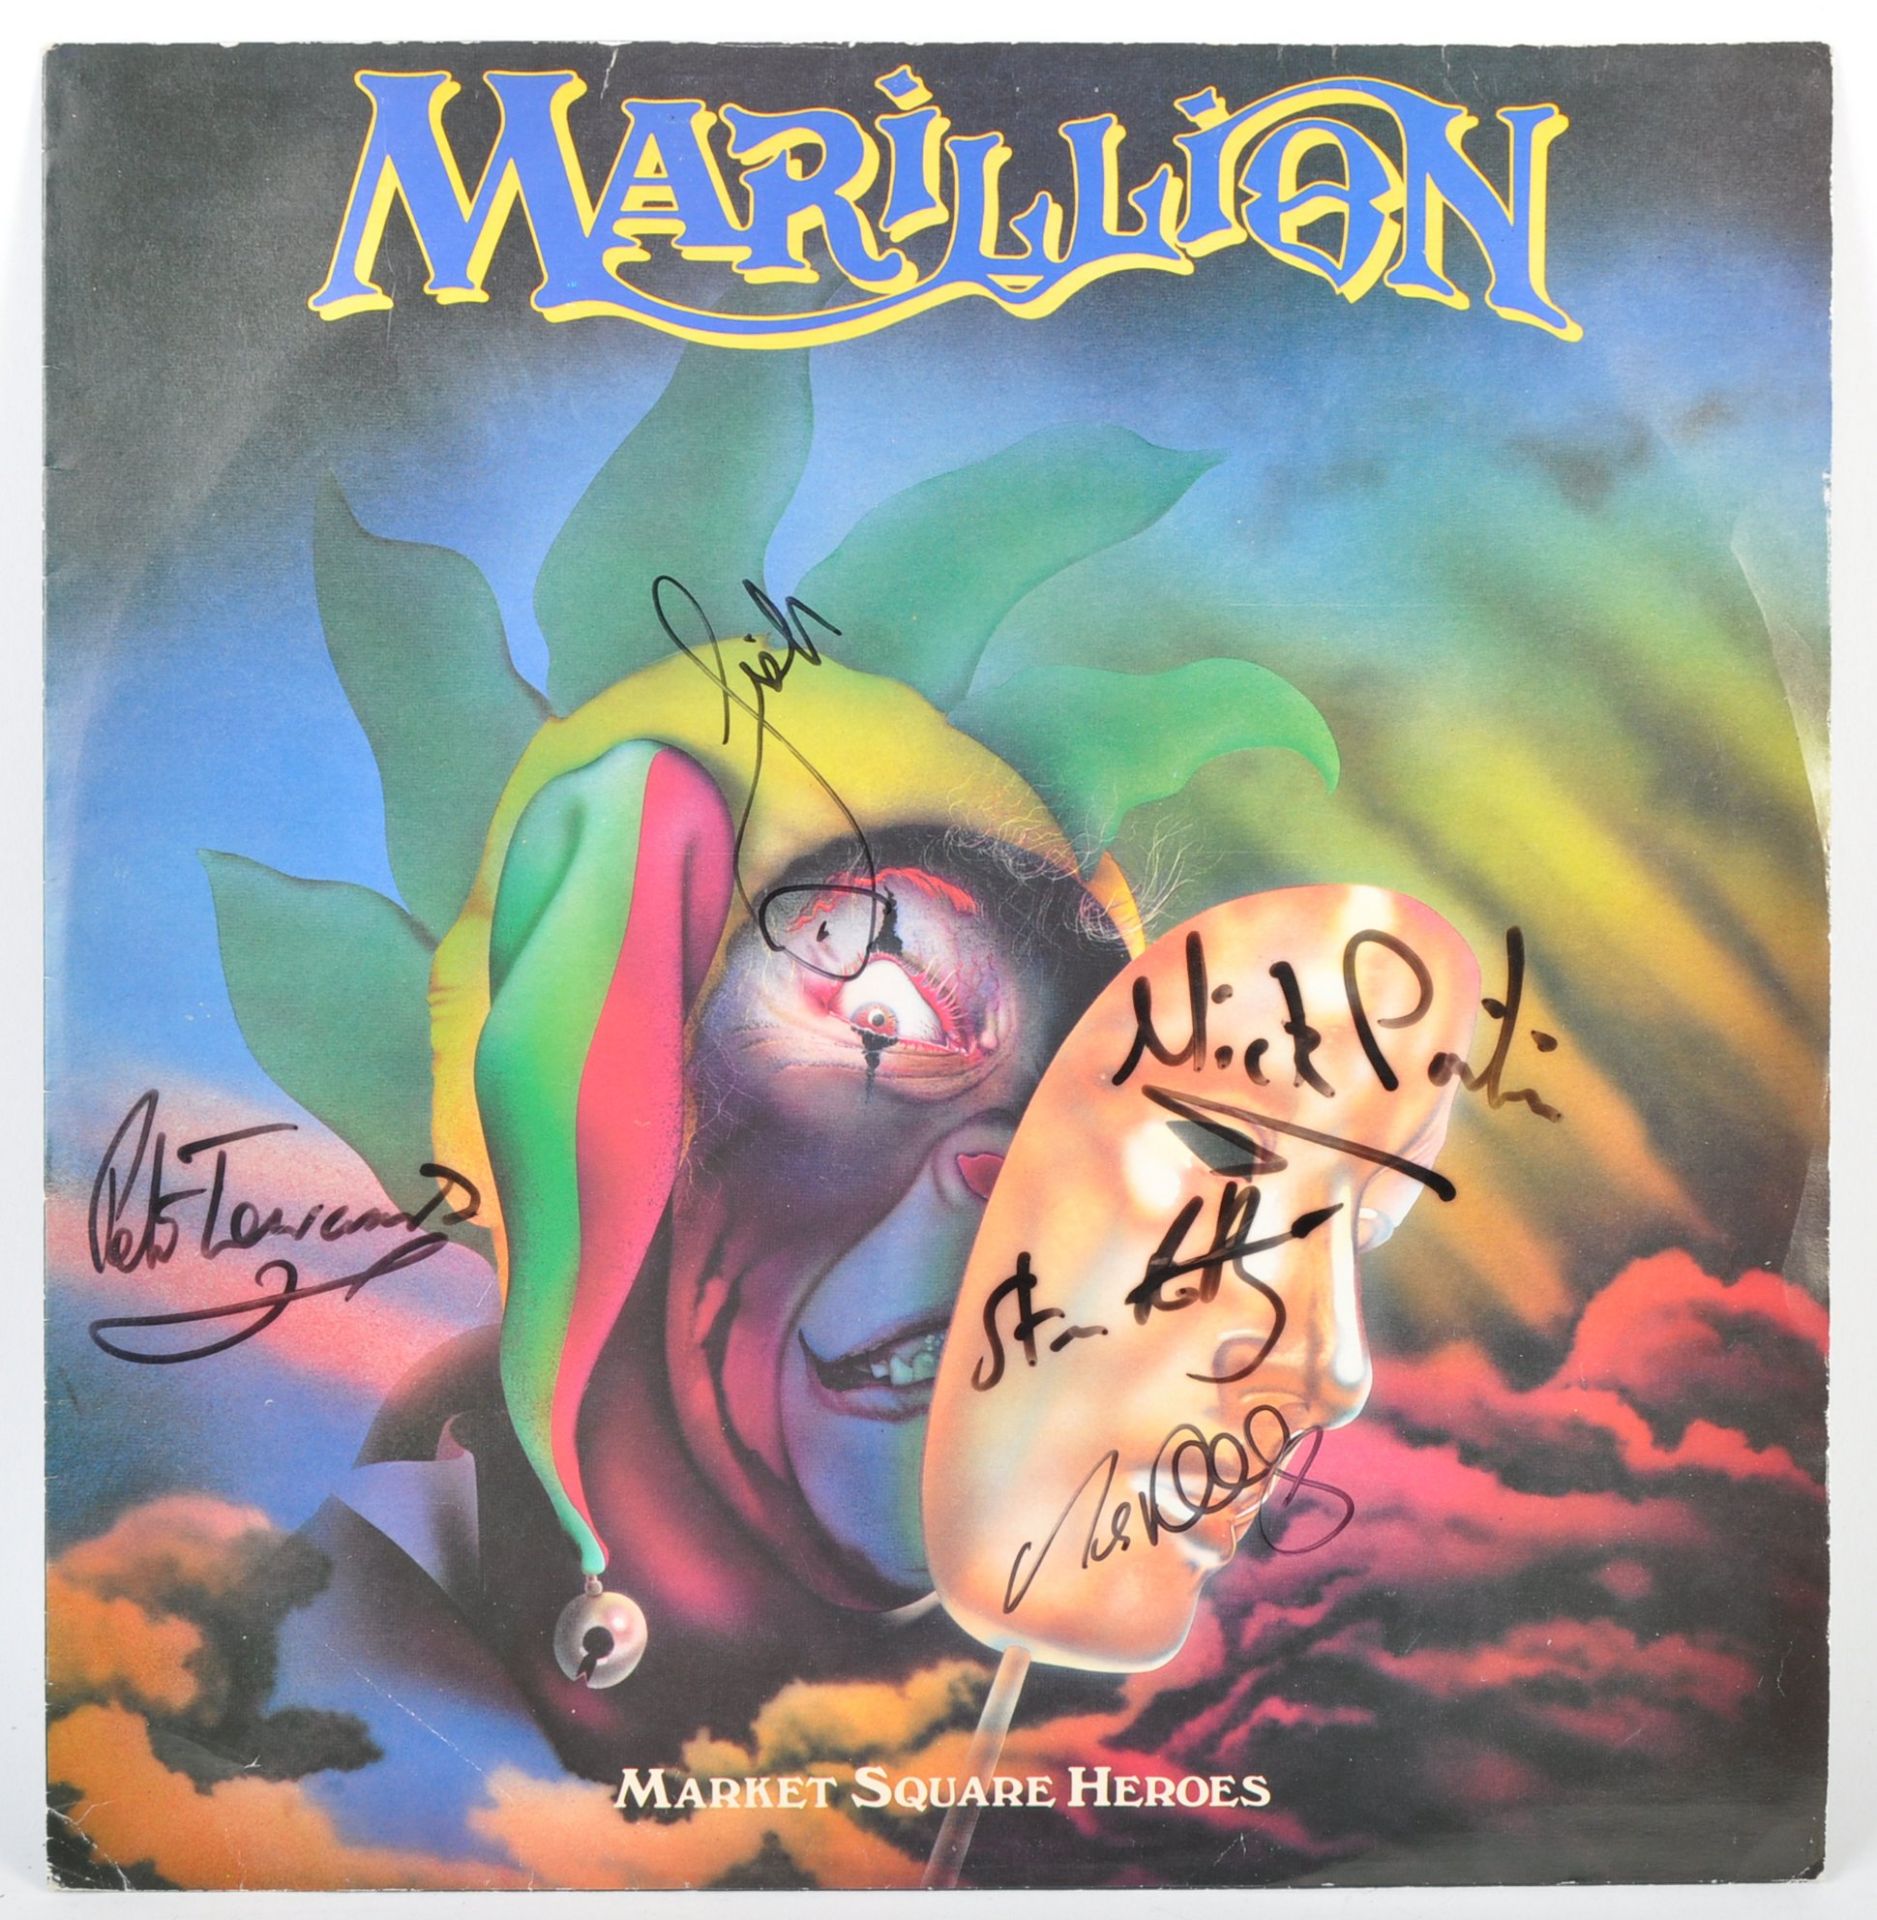 MARILLION SIGNED MARKET SQUARE HEROES 12" SINGLE AND SHOWCARD